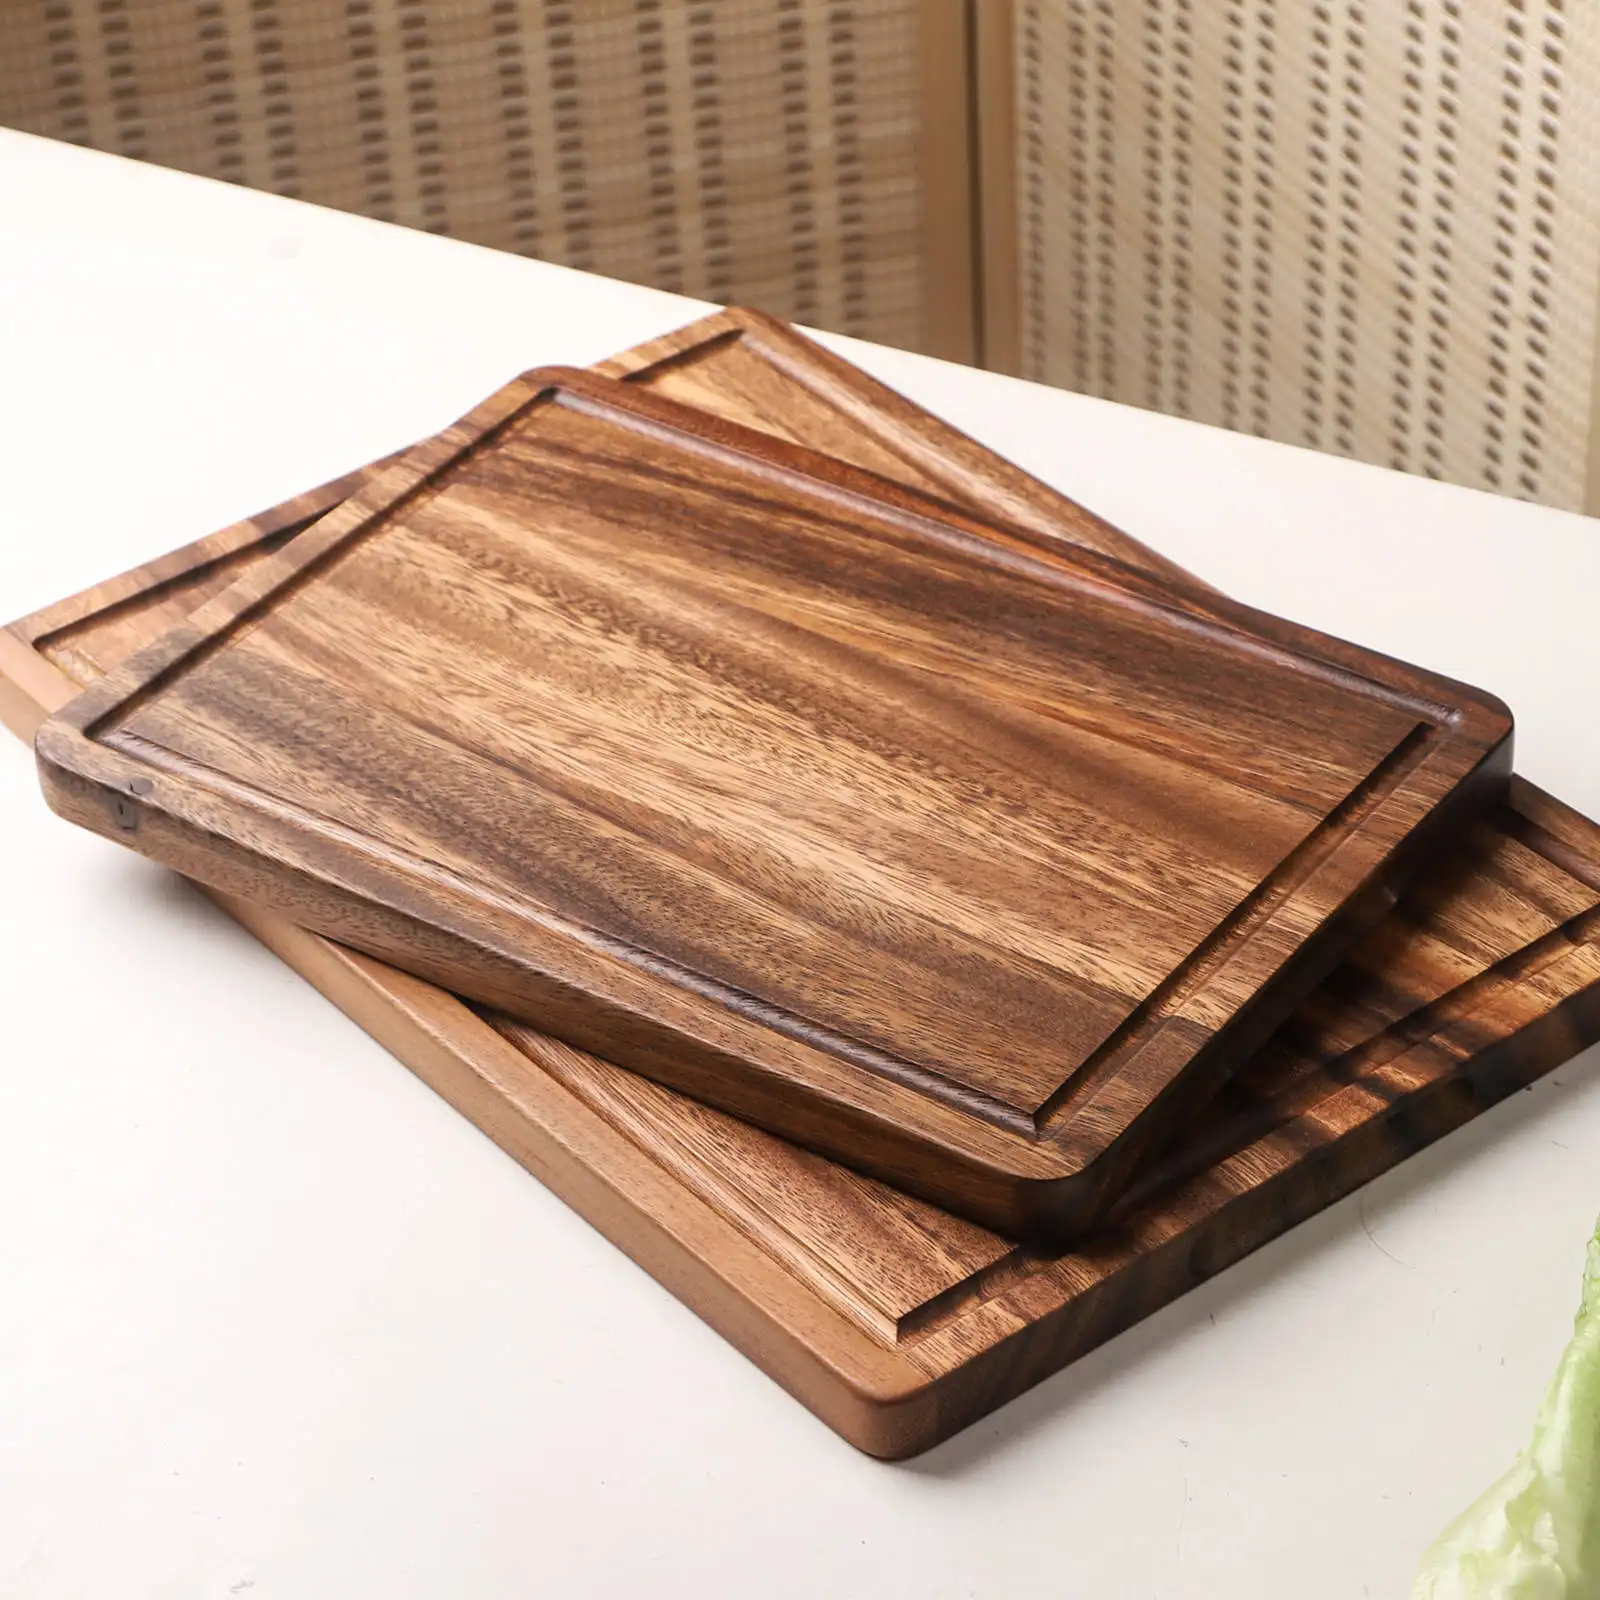 JOYWAVE Hot Sale Custom Wooden Chopping Board Wholesale Acacia Wood Cutting Board for Meat Cheese Vegetables Fruits